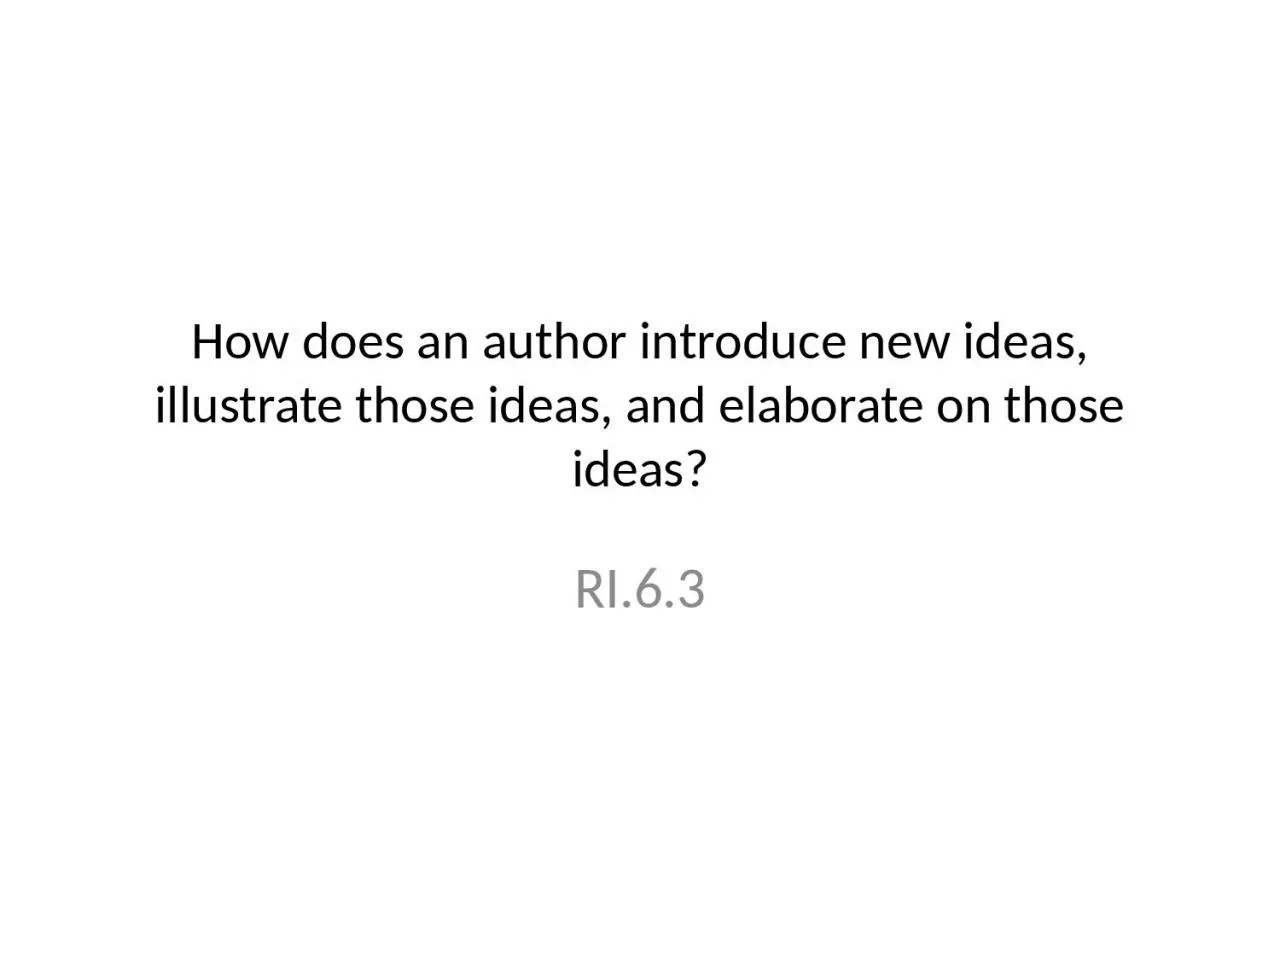 How does an author introduce new ideas, illustrate those ideas, and elaborate on those